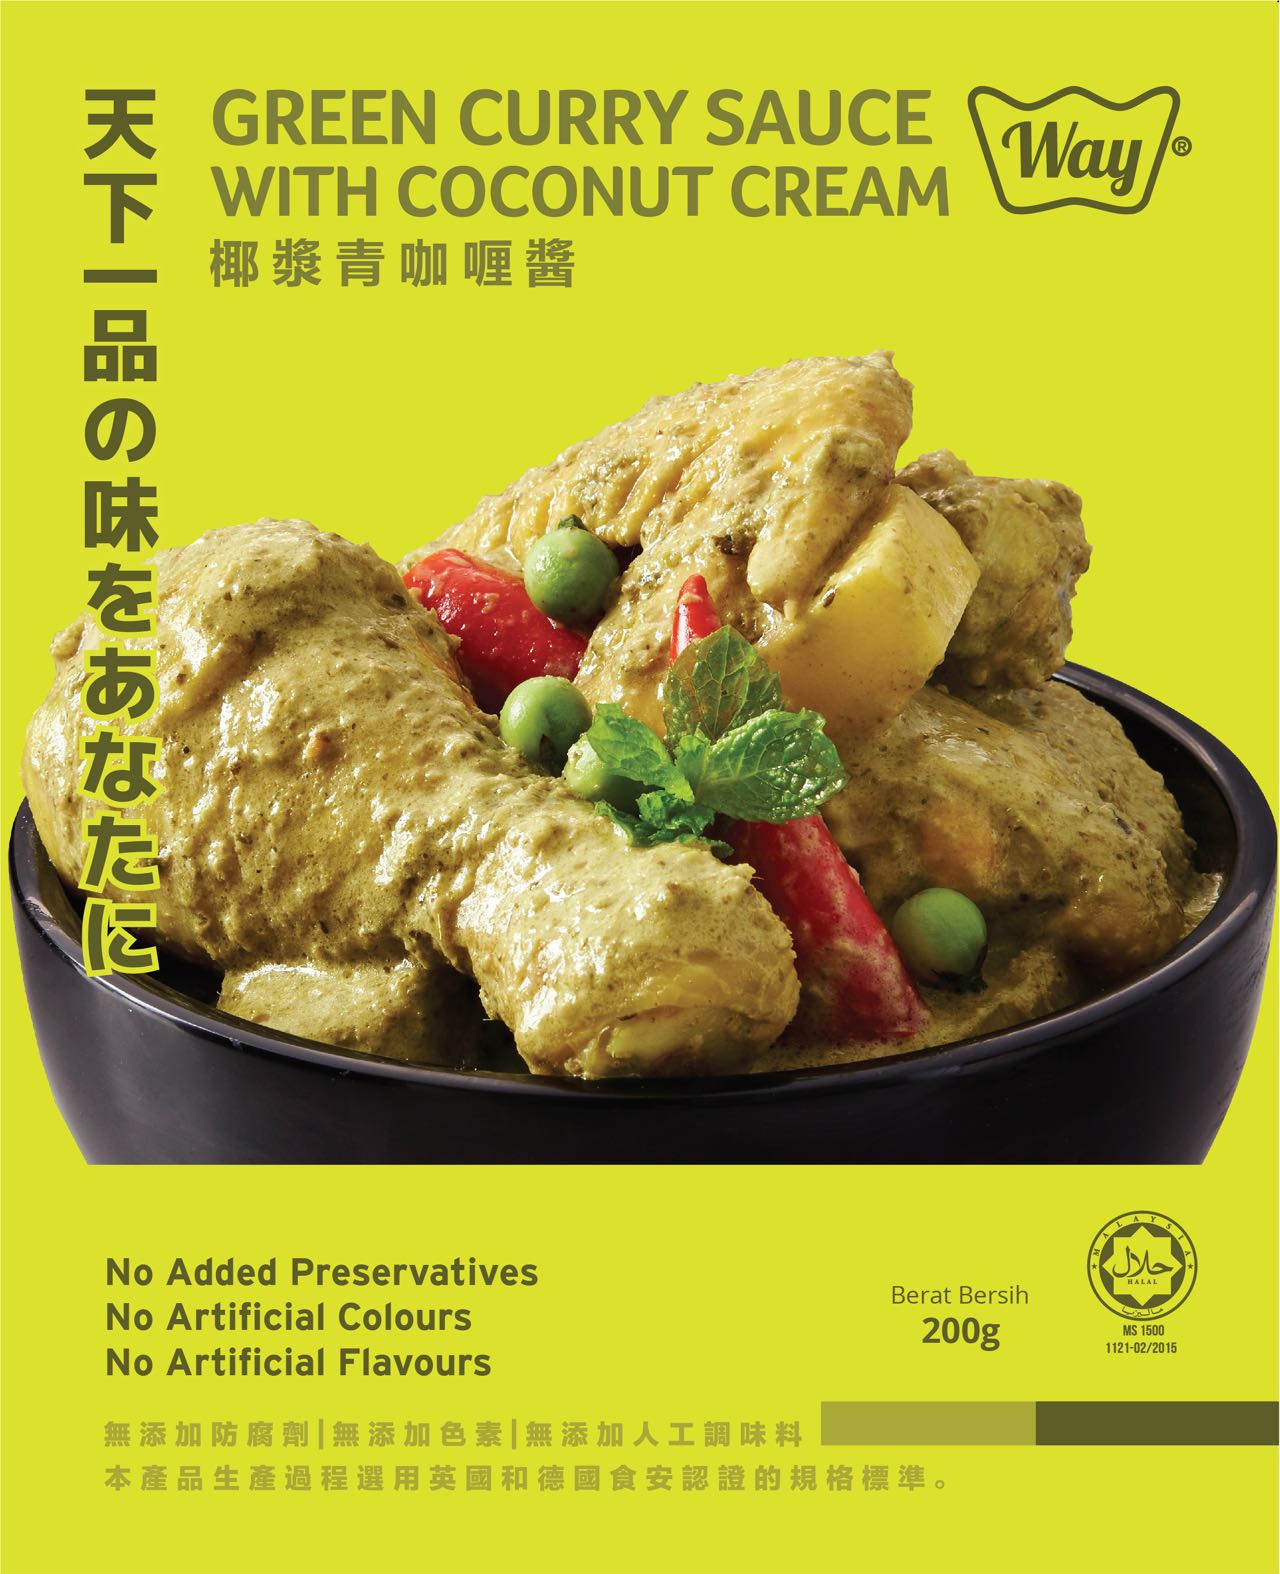 Green Curry with Coconut Cream 椰浆青咖喱酱 [ 2x100g ]